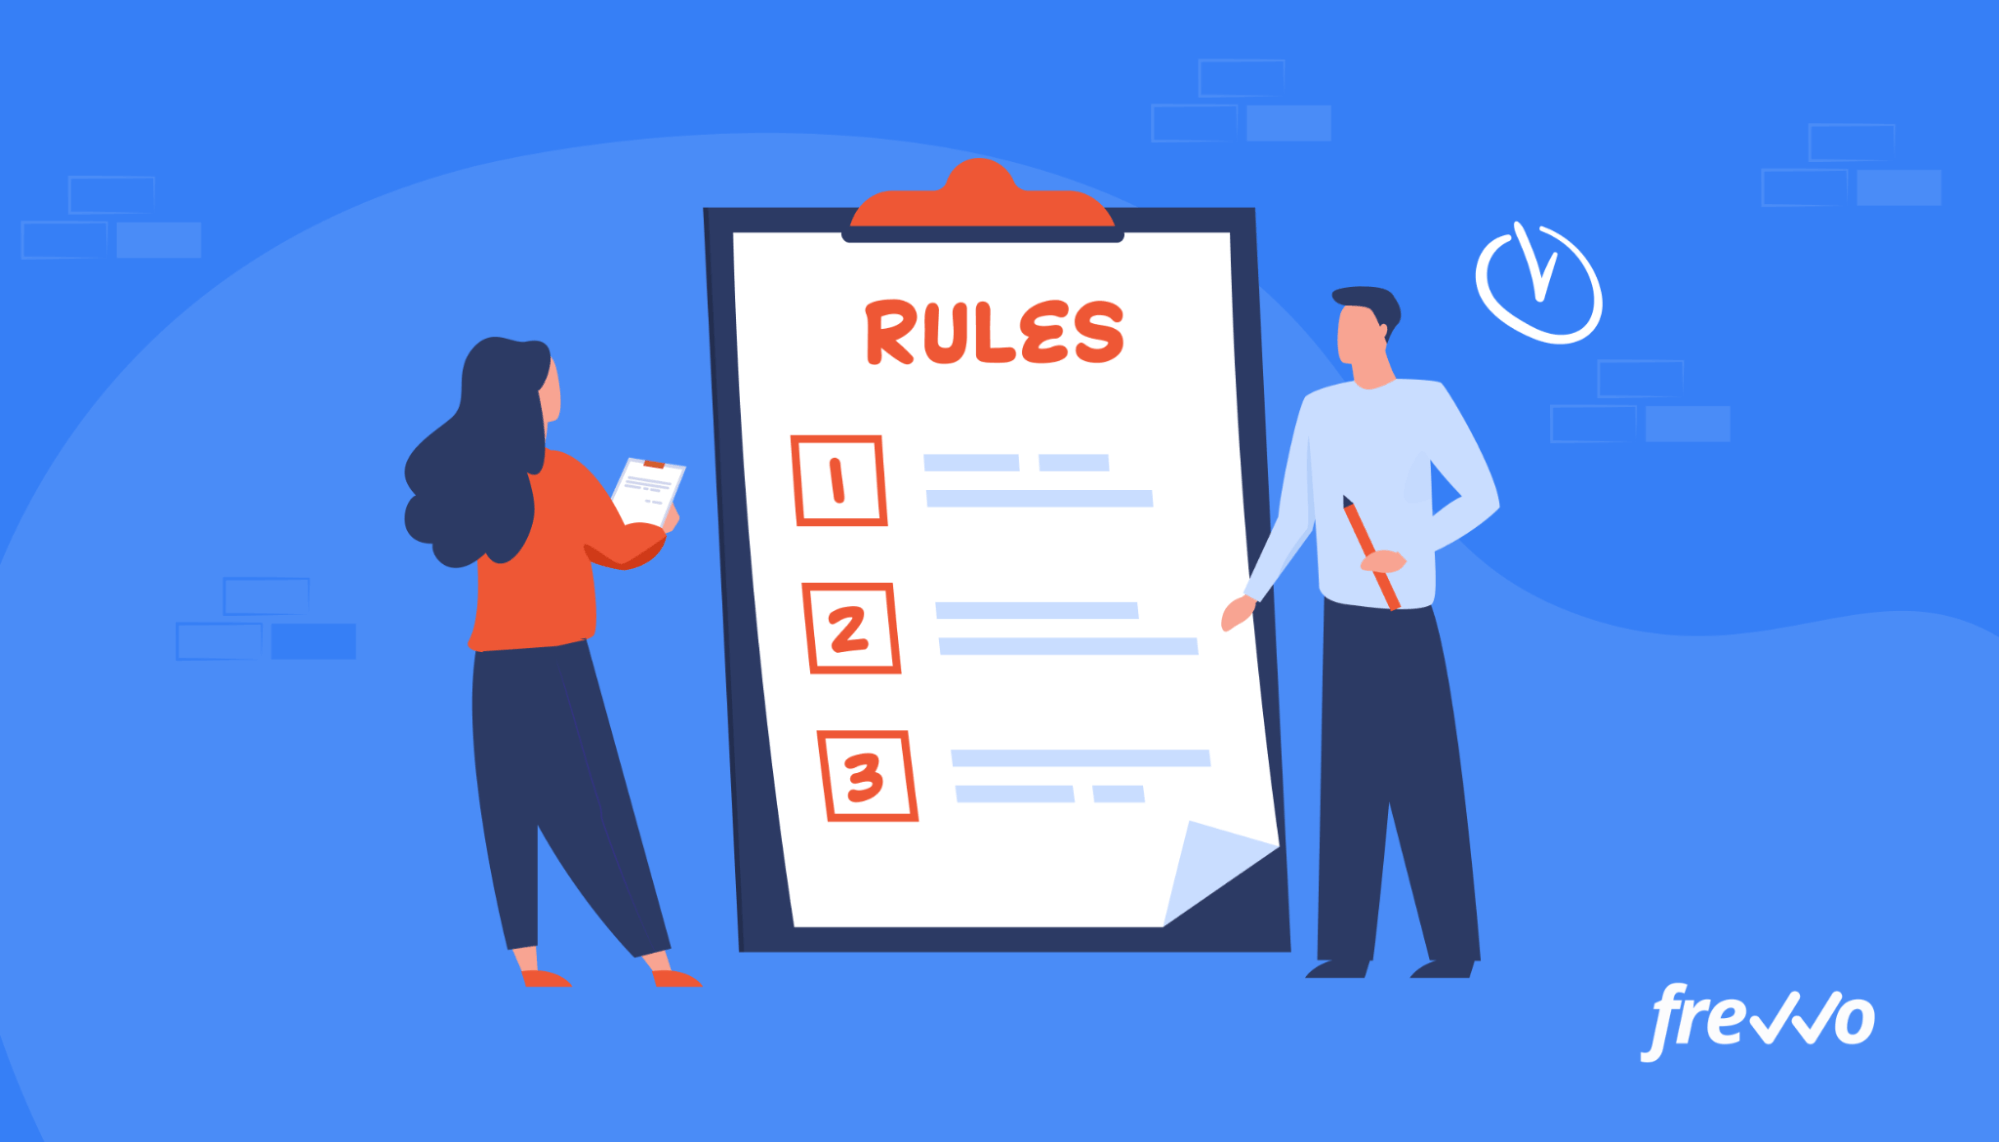 10 Examples of Business Rules That Make Work More Efficient frevvo Blog